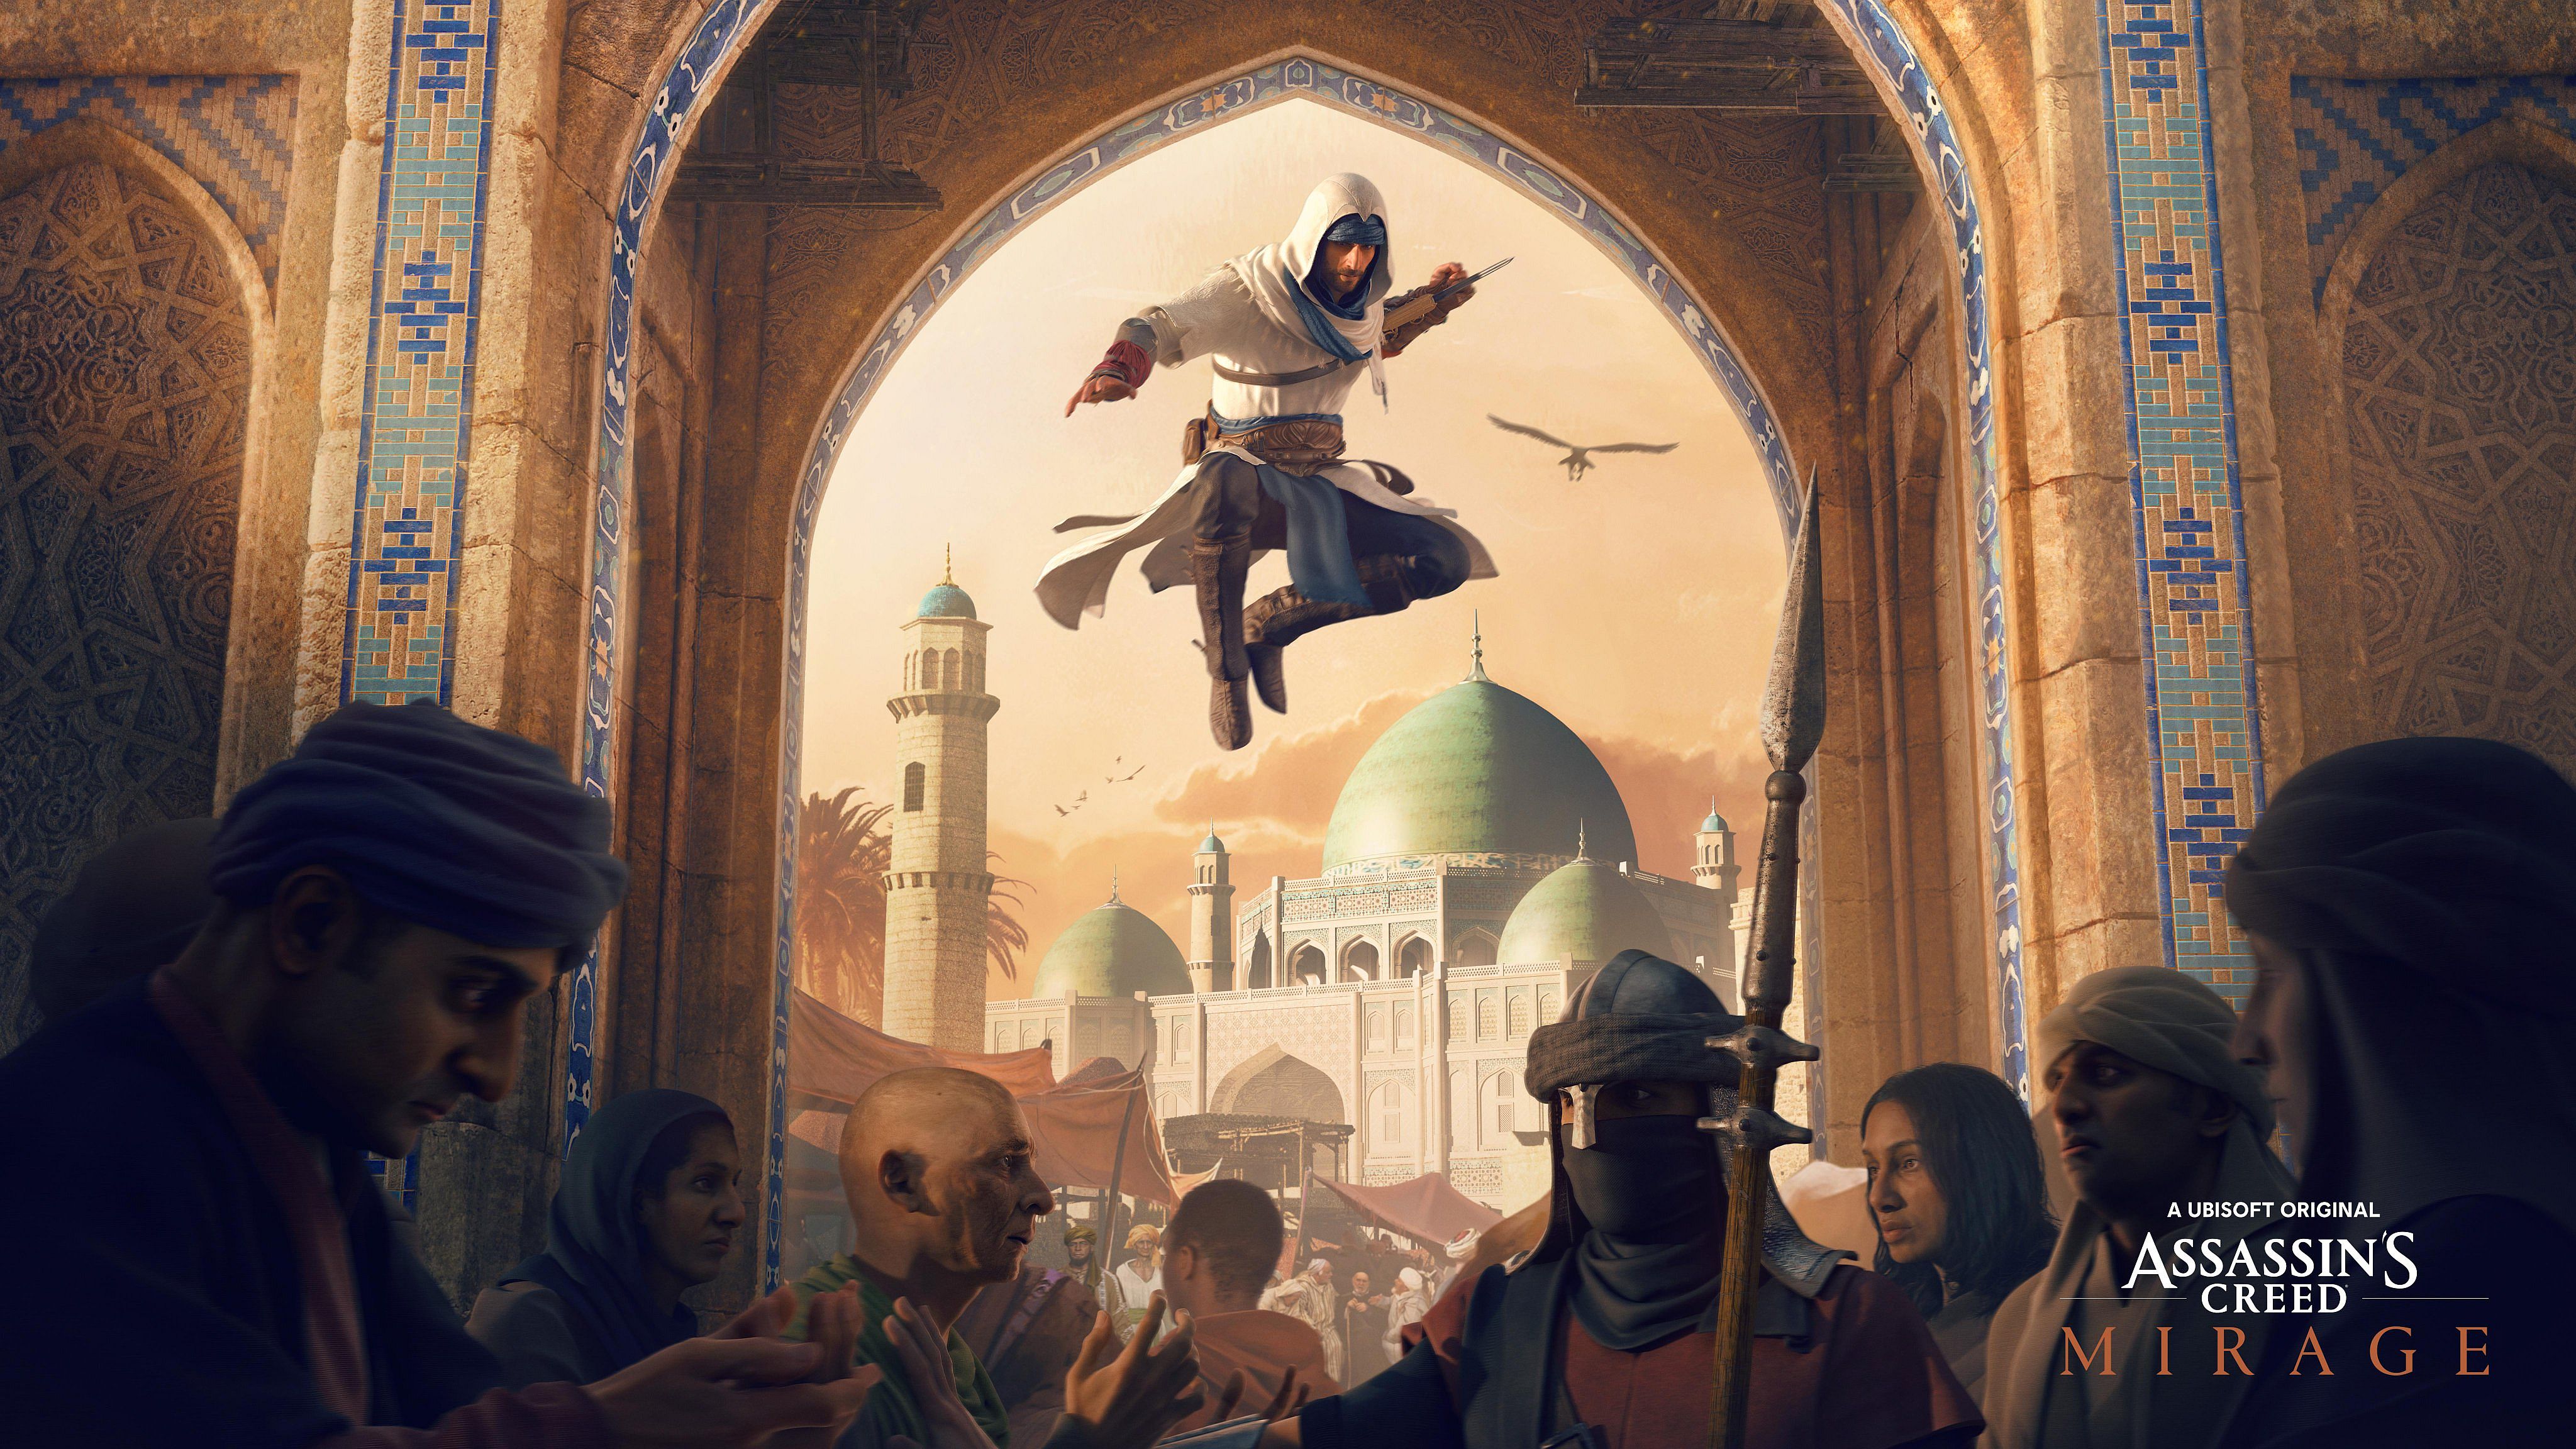 Image for Ubisoft promises Assassin's Creed Mirage won't have "real gambling" in the game